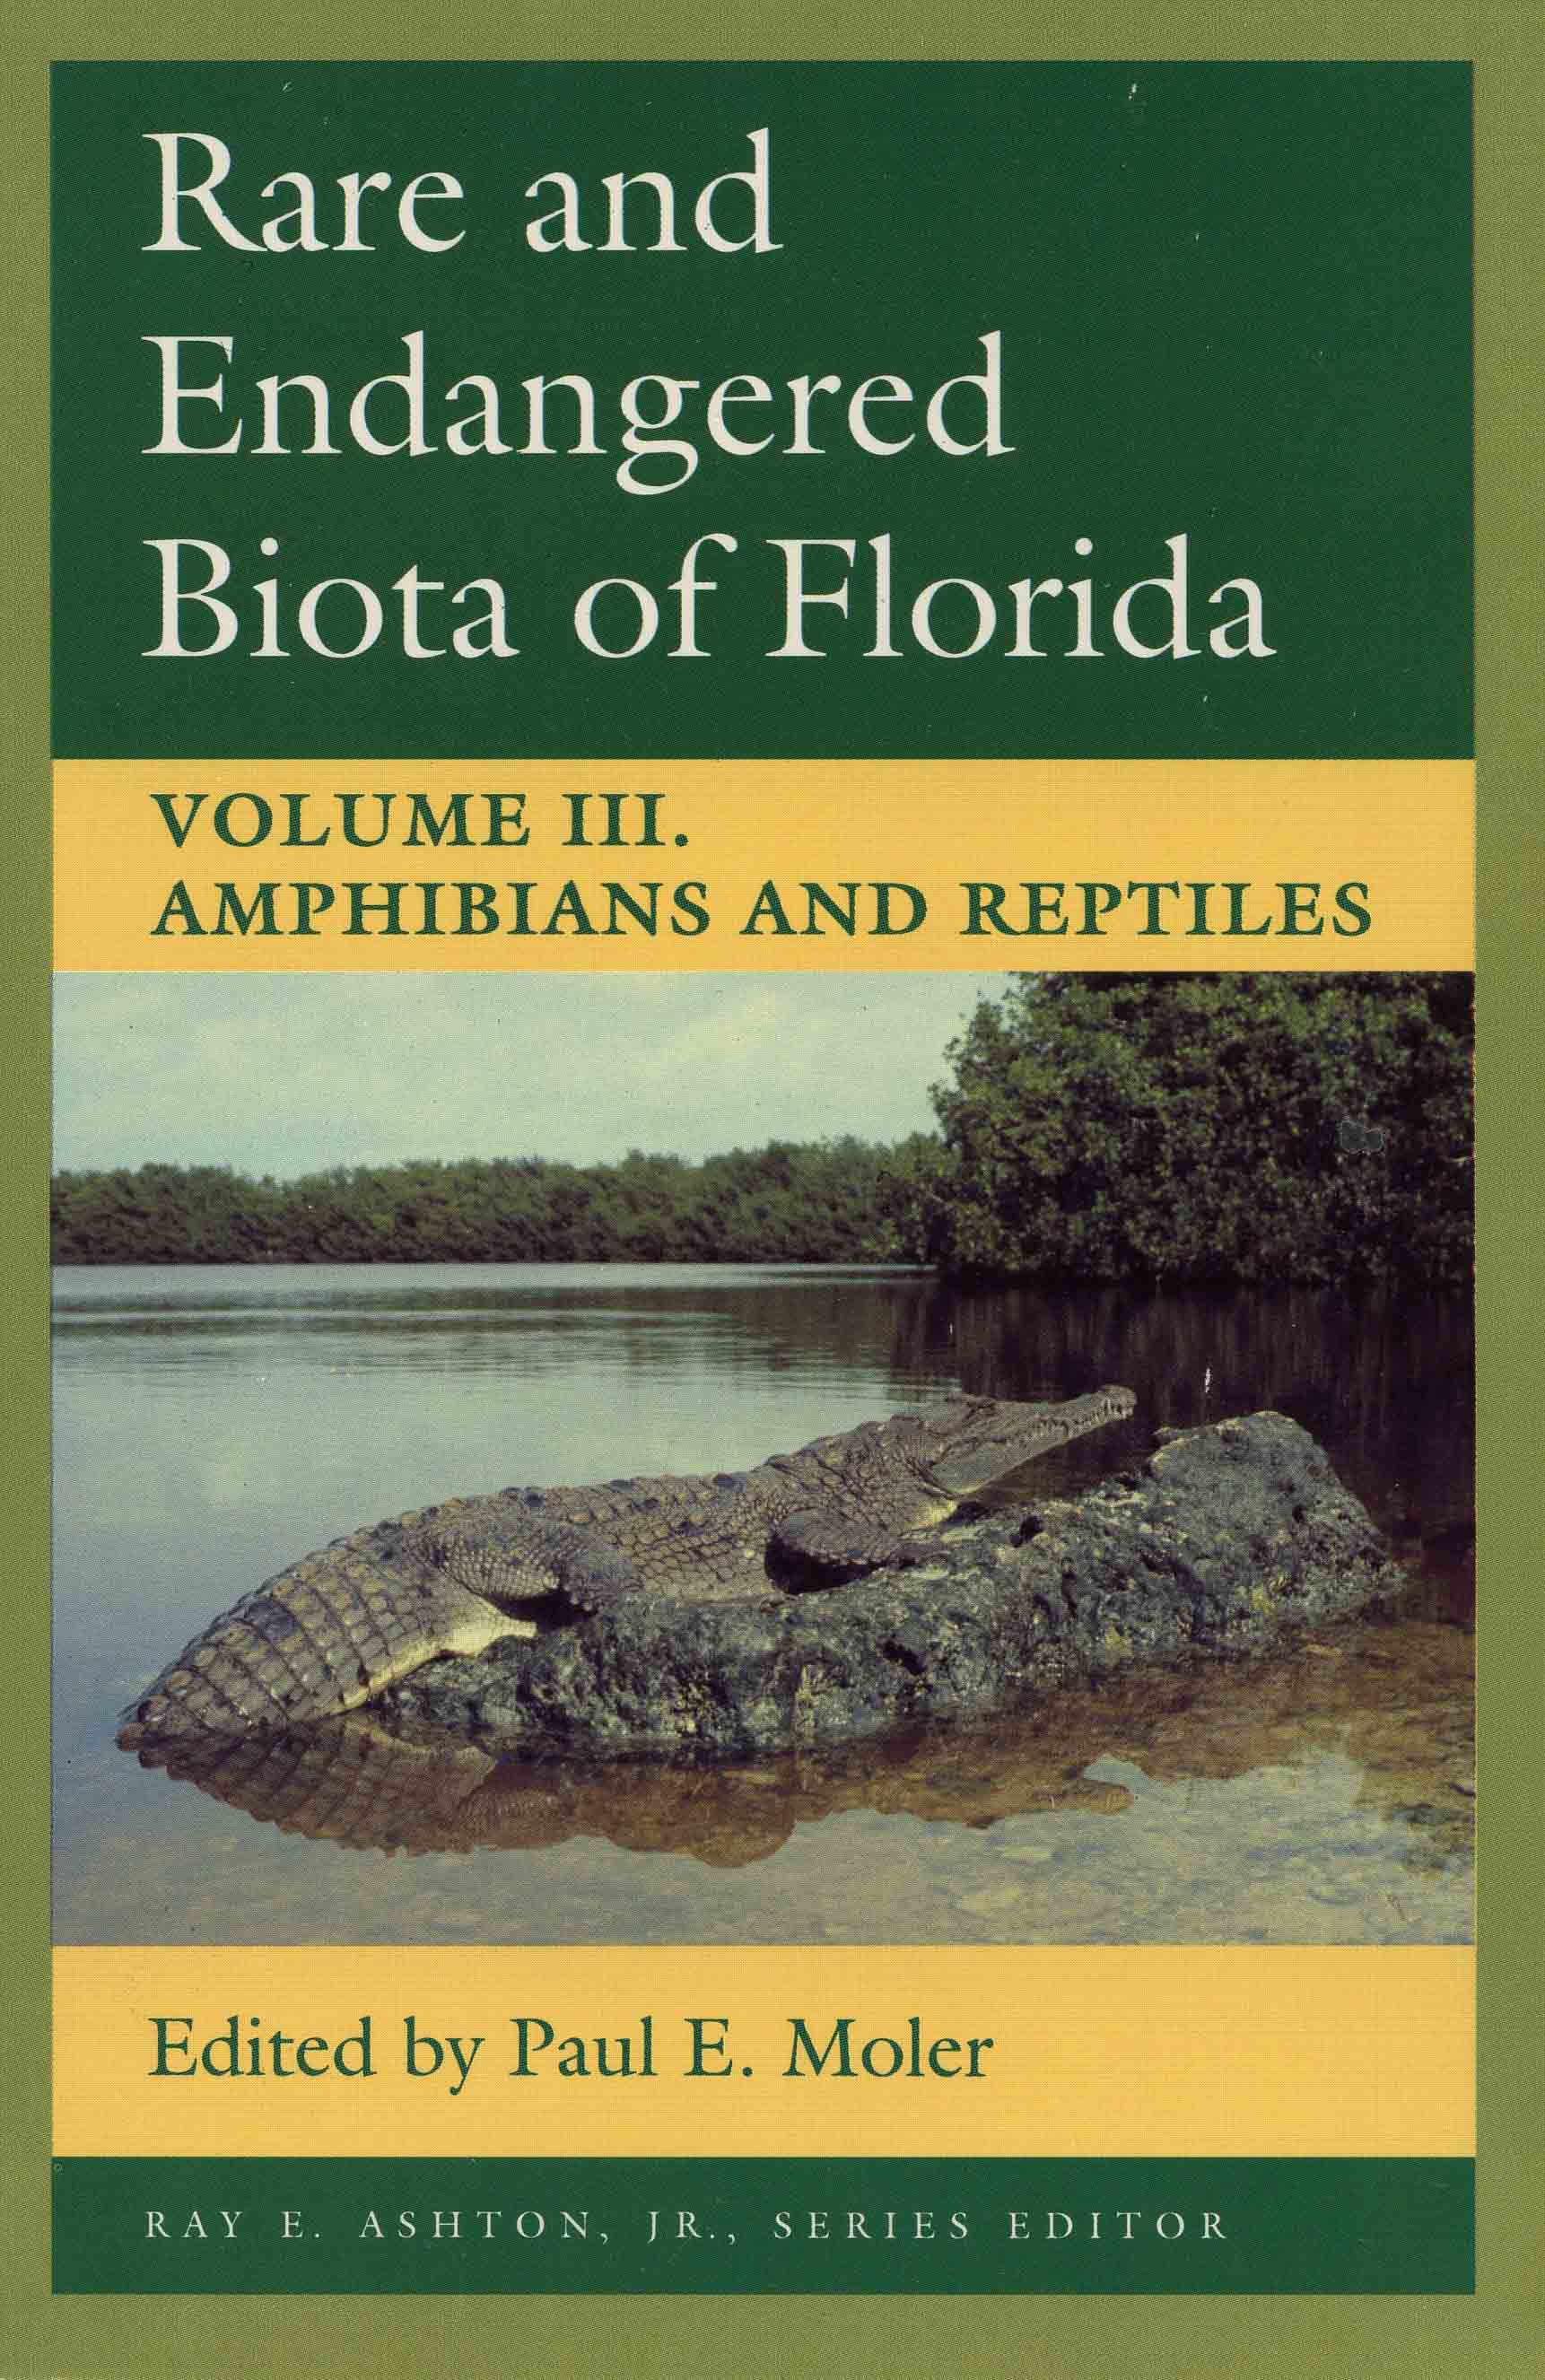 Image for Rare and Endangered Biota of Florida, Volume III: Amphibians and Reptiles